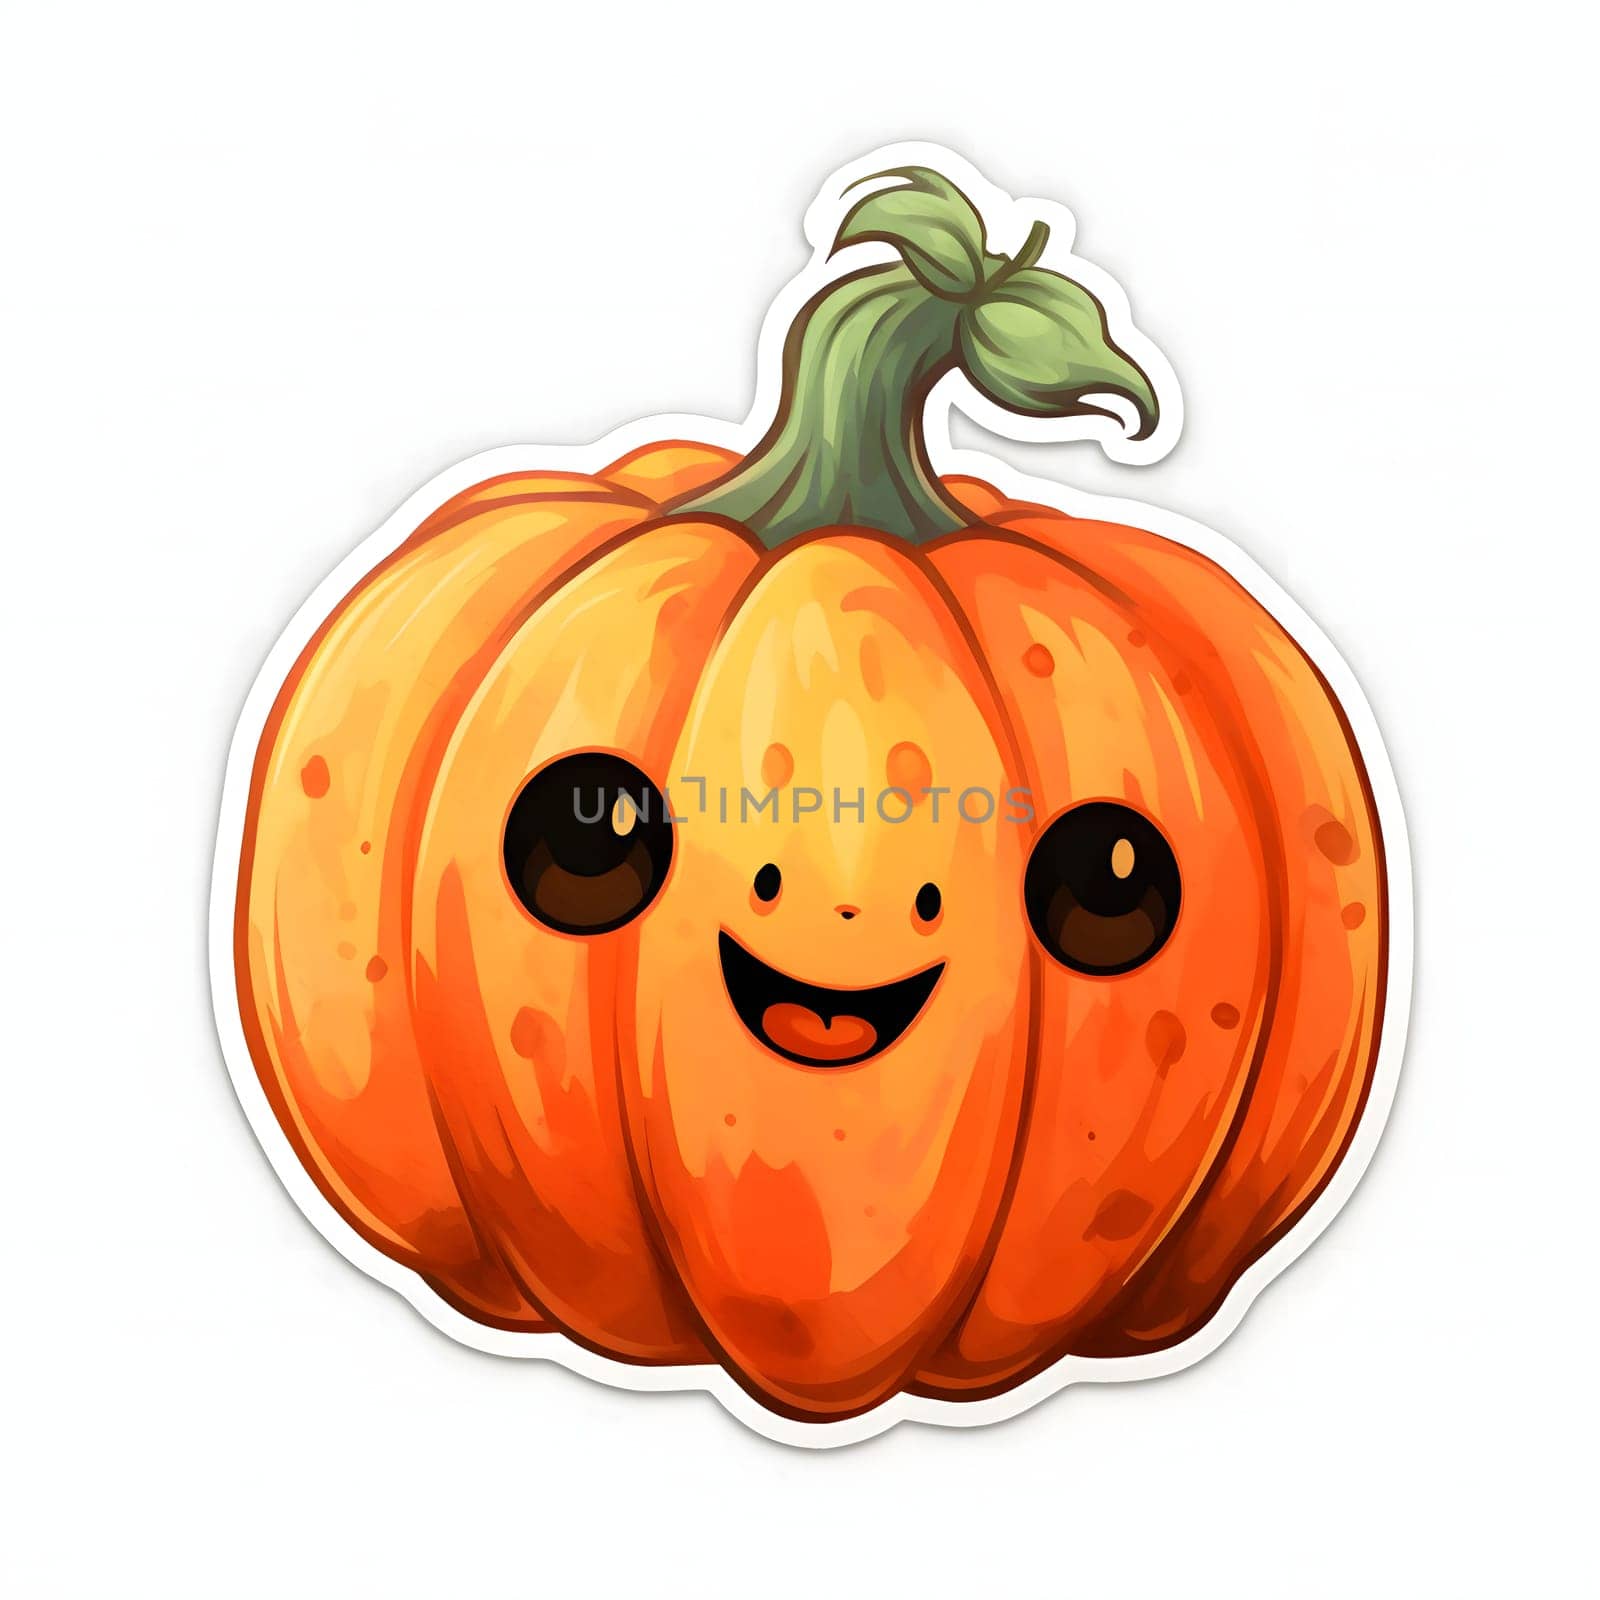 Sticker small smiling pumpkin, Halloween image on a white isolated background. Atmosphere of darkness and fear.